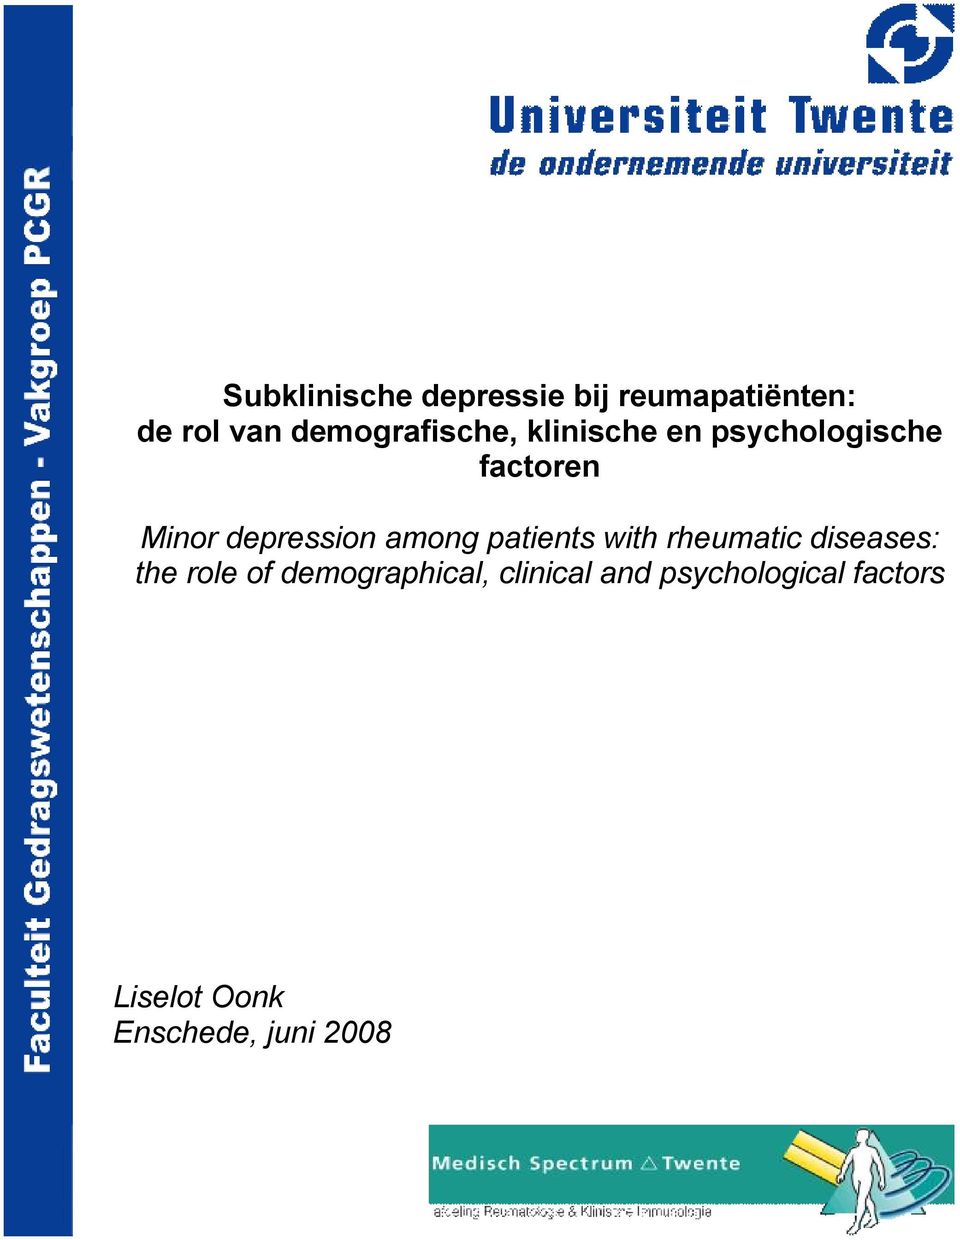 depression among patients with rheumatic diseases: the role of